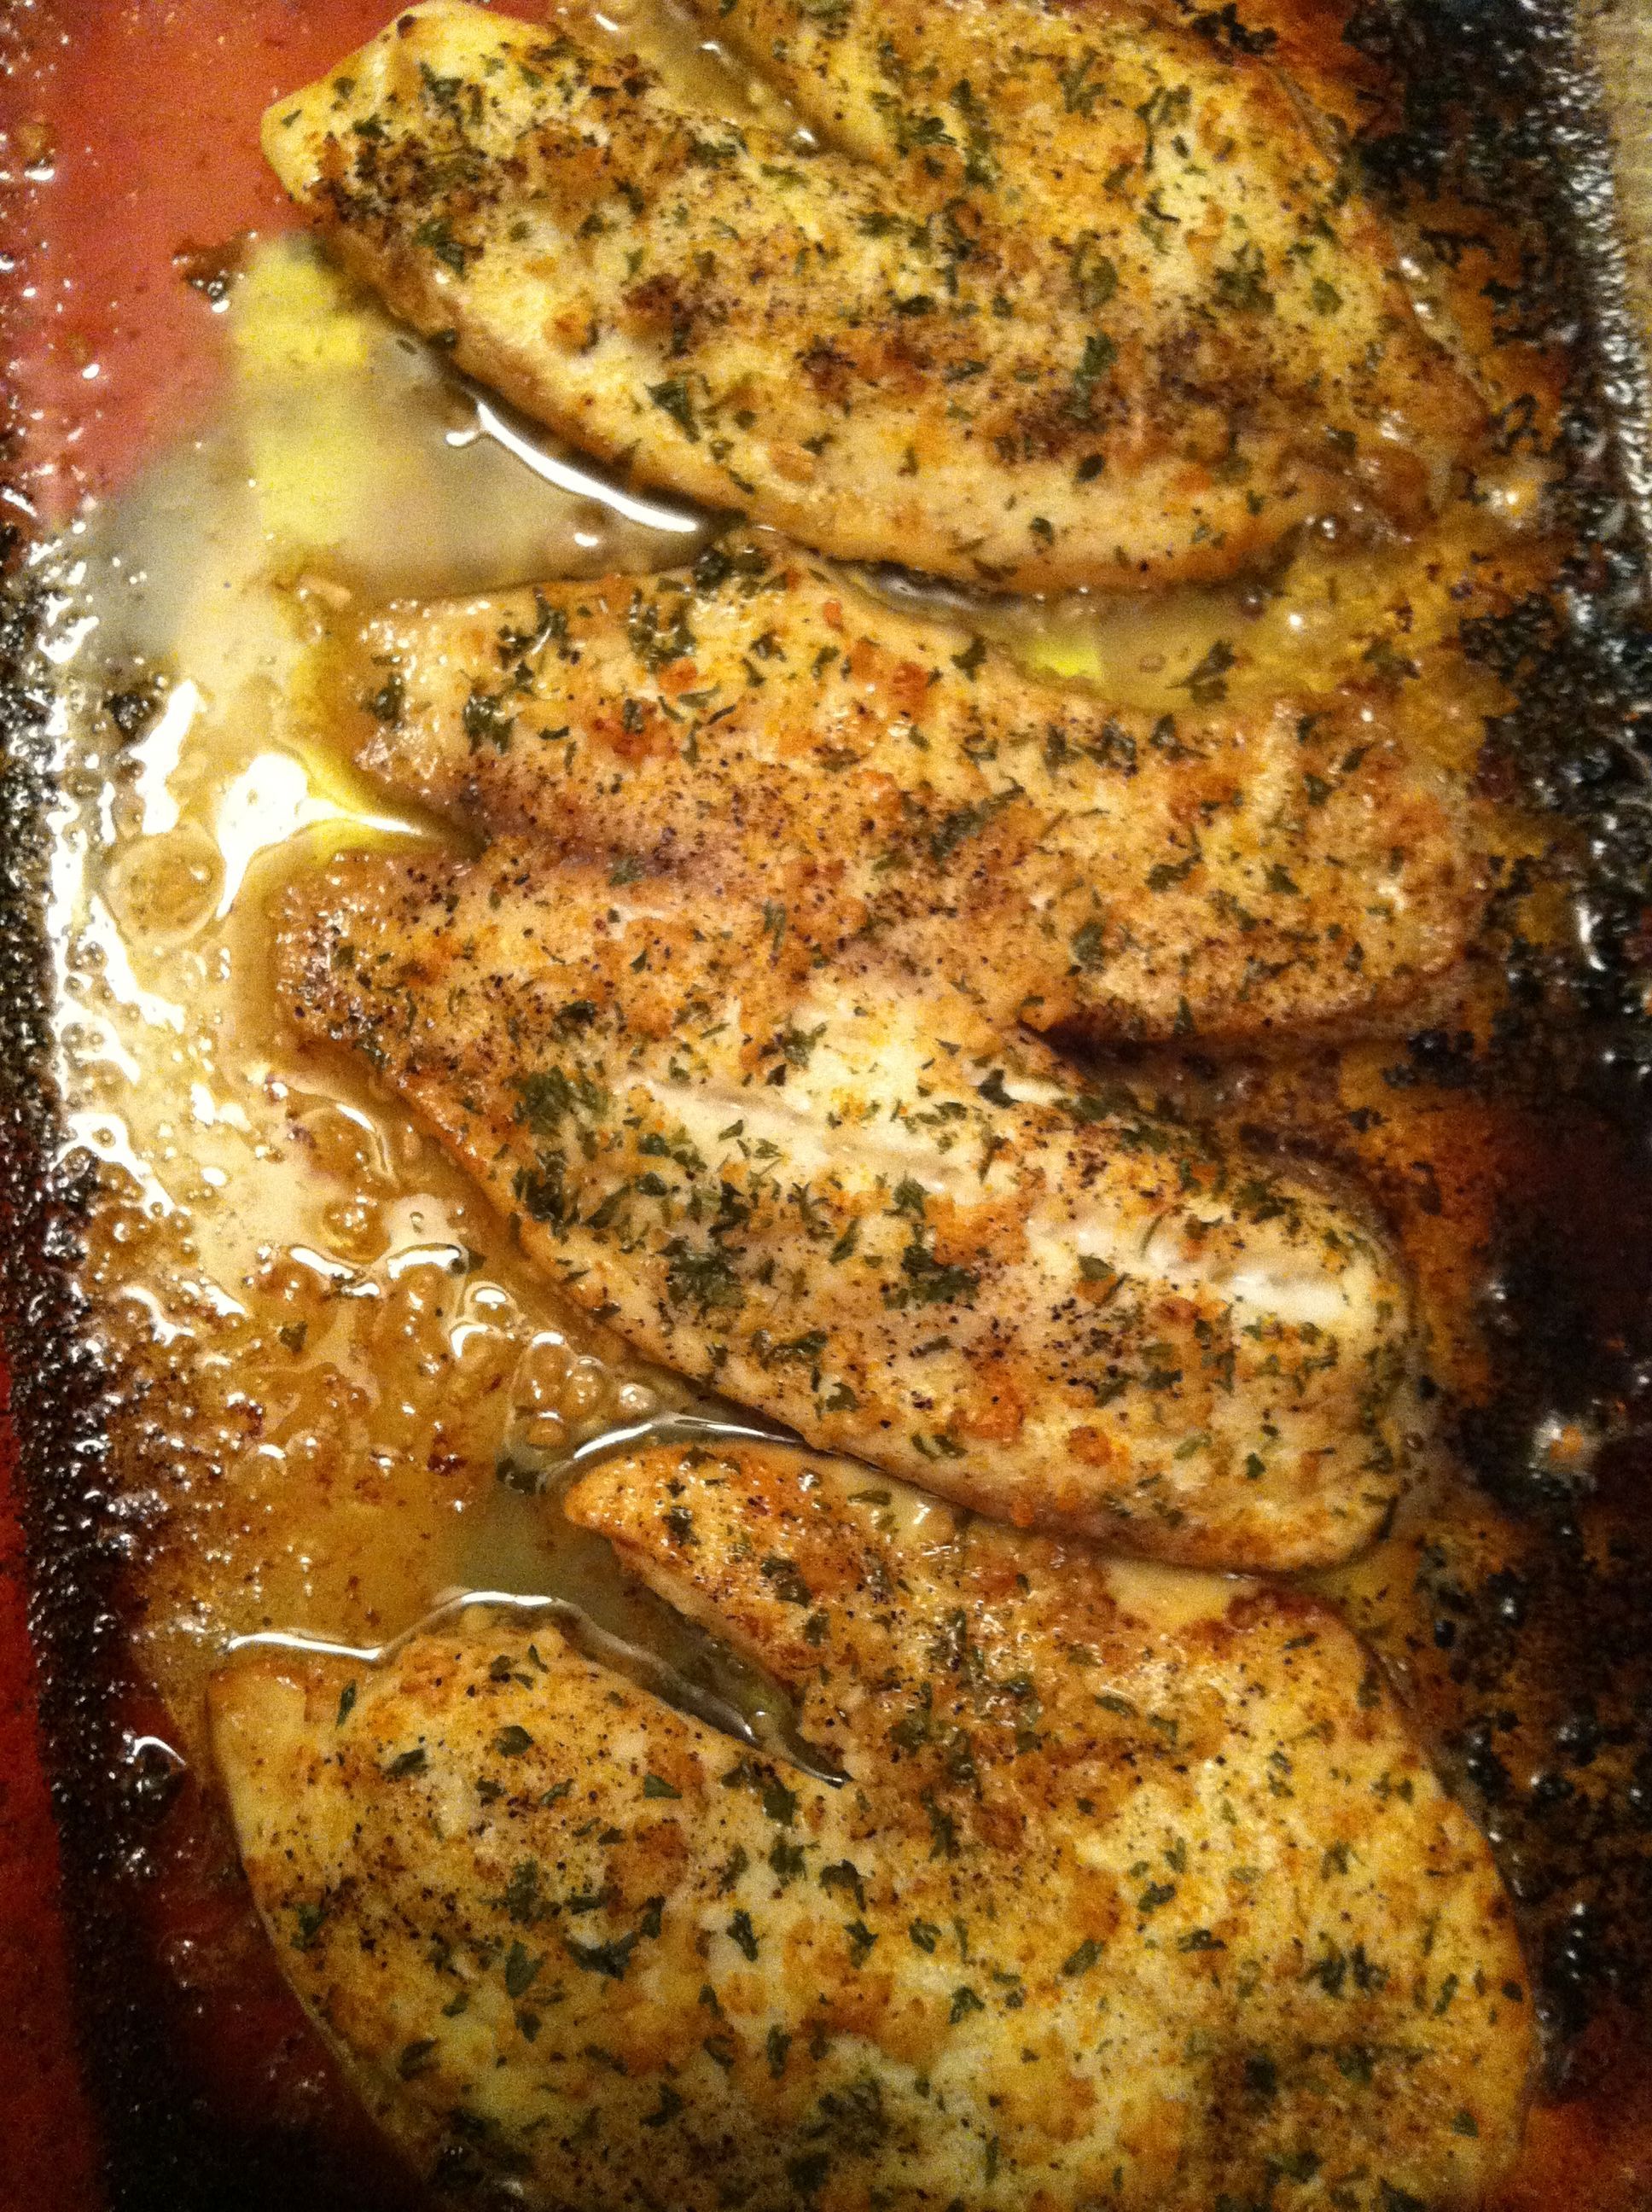 Baked Lemon Tilapia; used olive oil instead of butter. Delicious!